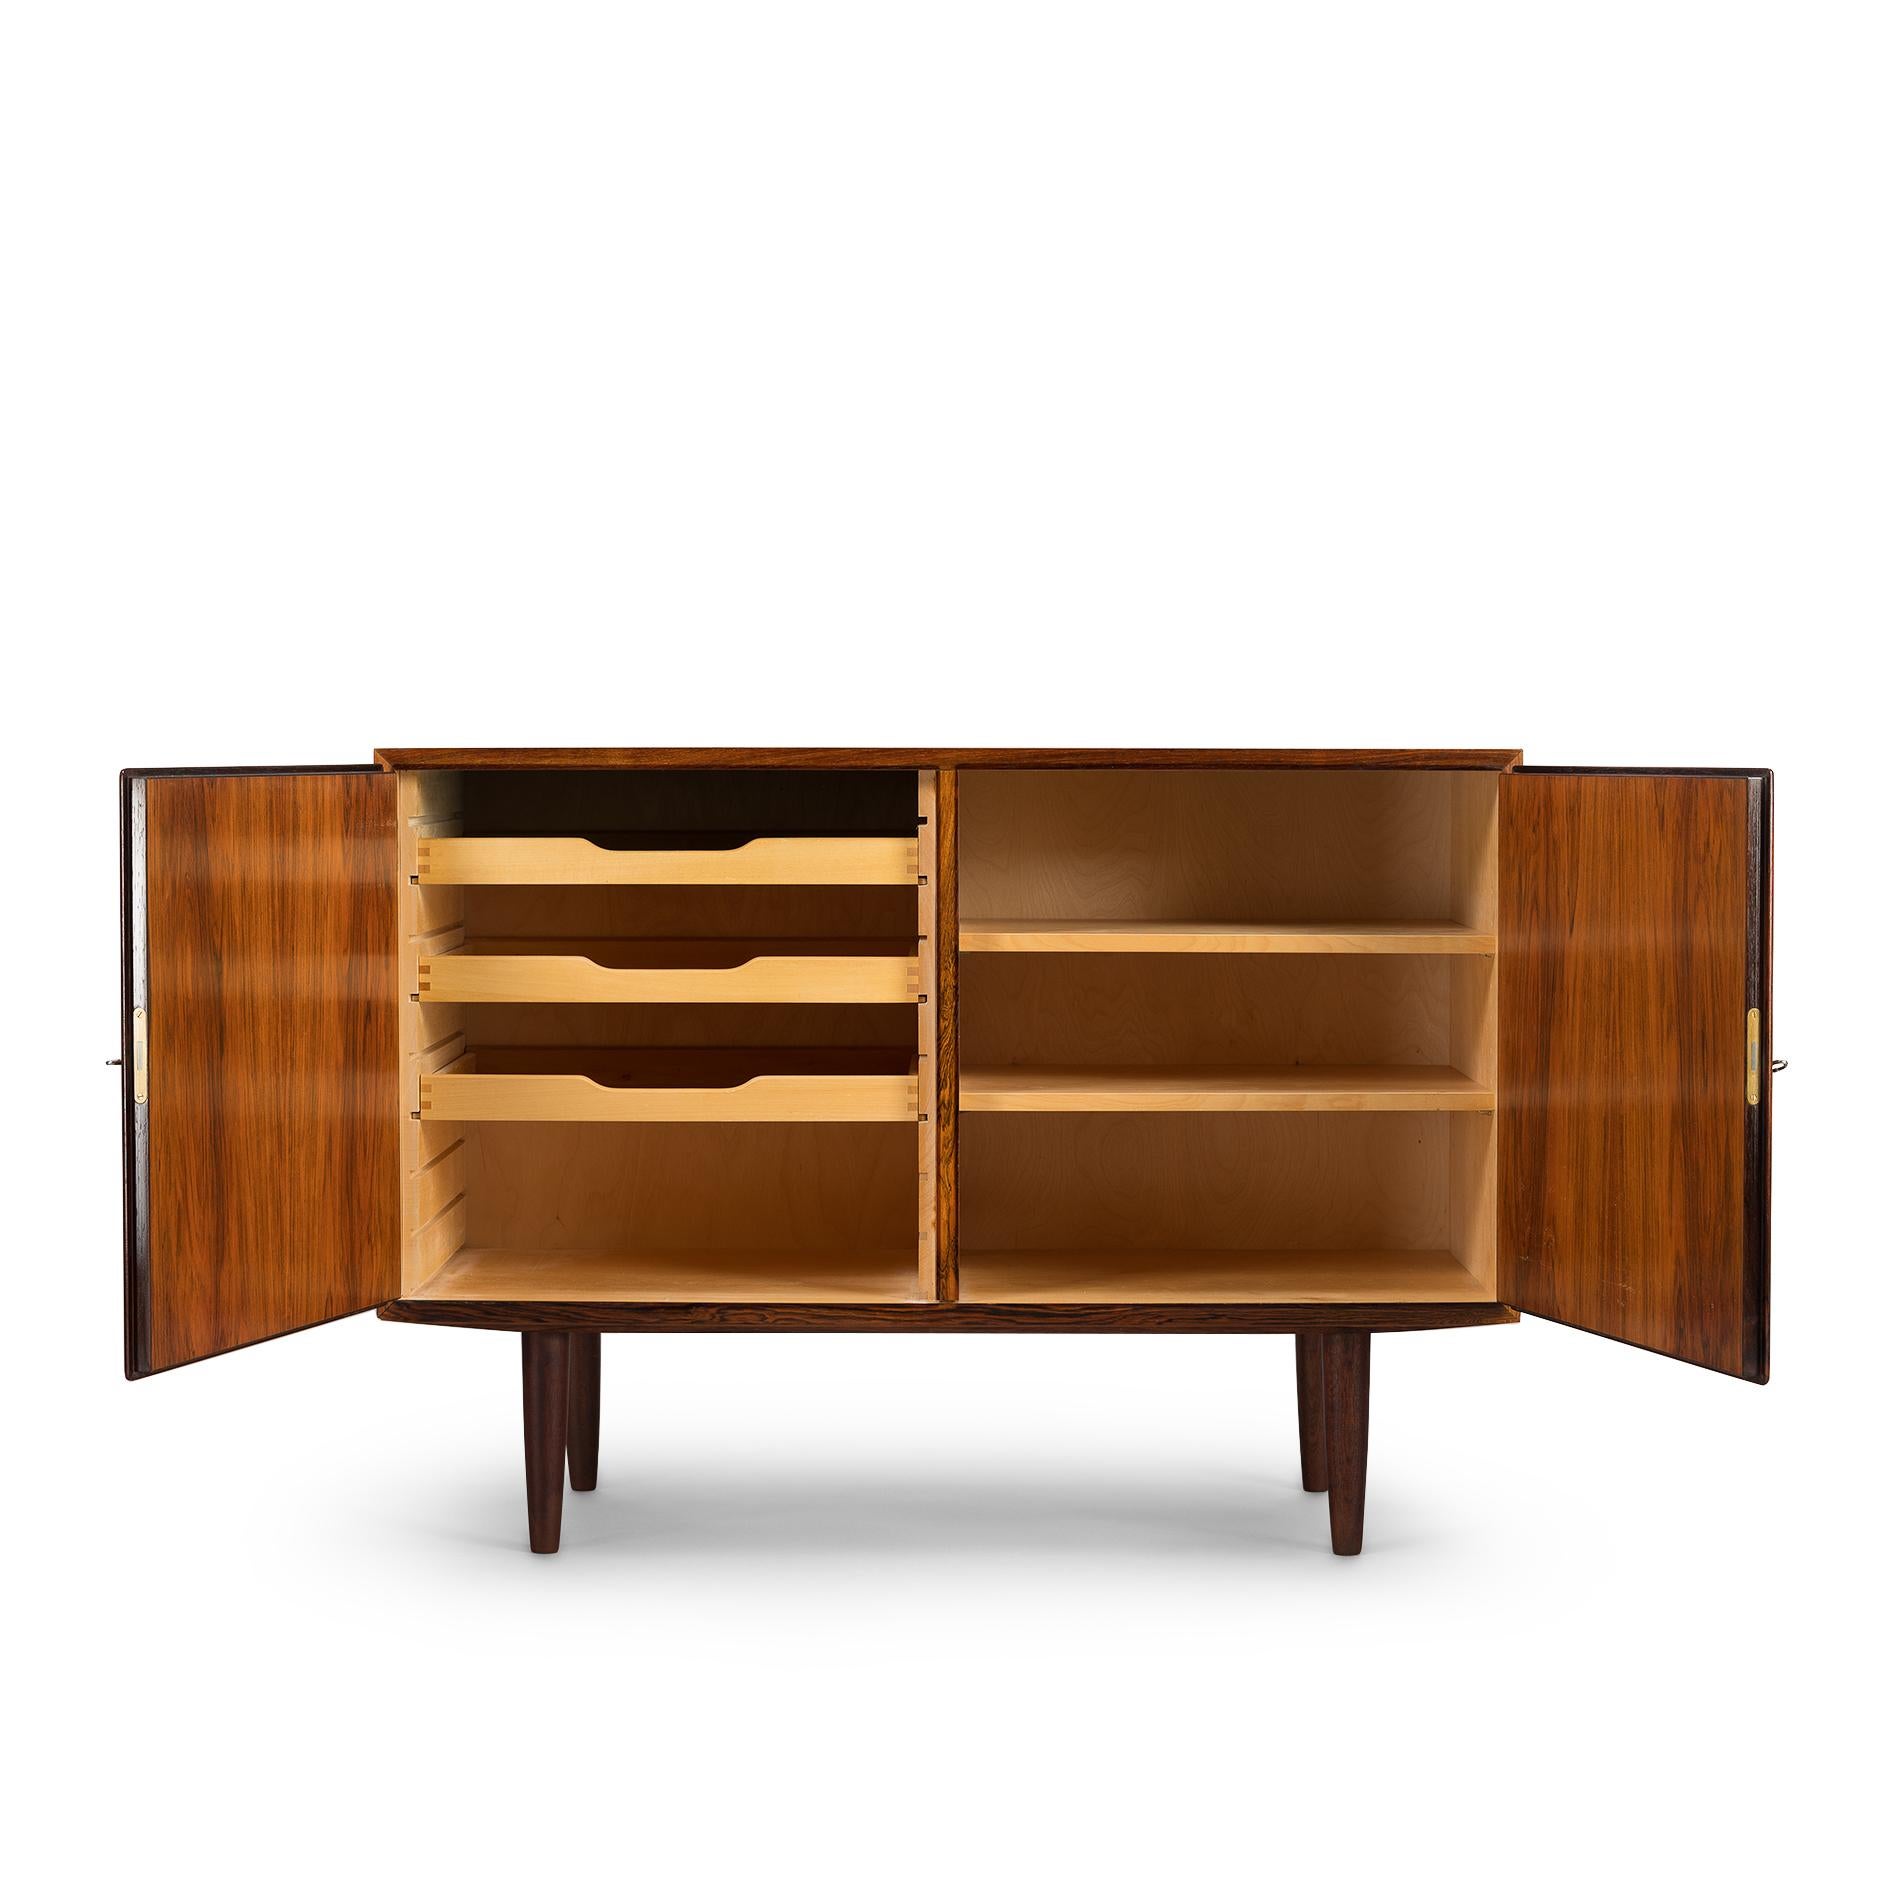 Designed by Carlo Jensen and made by Hundevad & Co. this side board is truly a classic design. Finished in a beautiful Mahogany veneer this cabinet comes with great construction finesse and quality. There are height adjustable drawers on the left